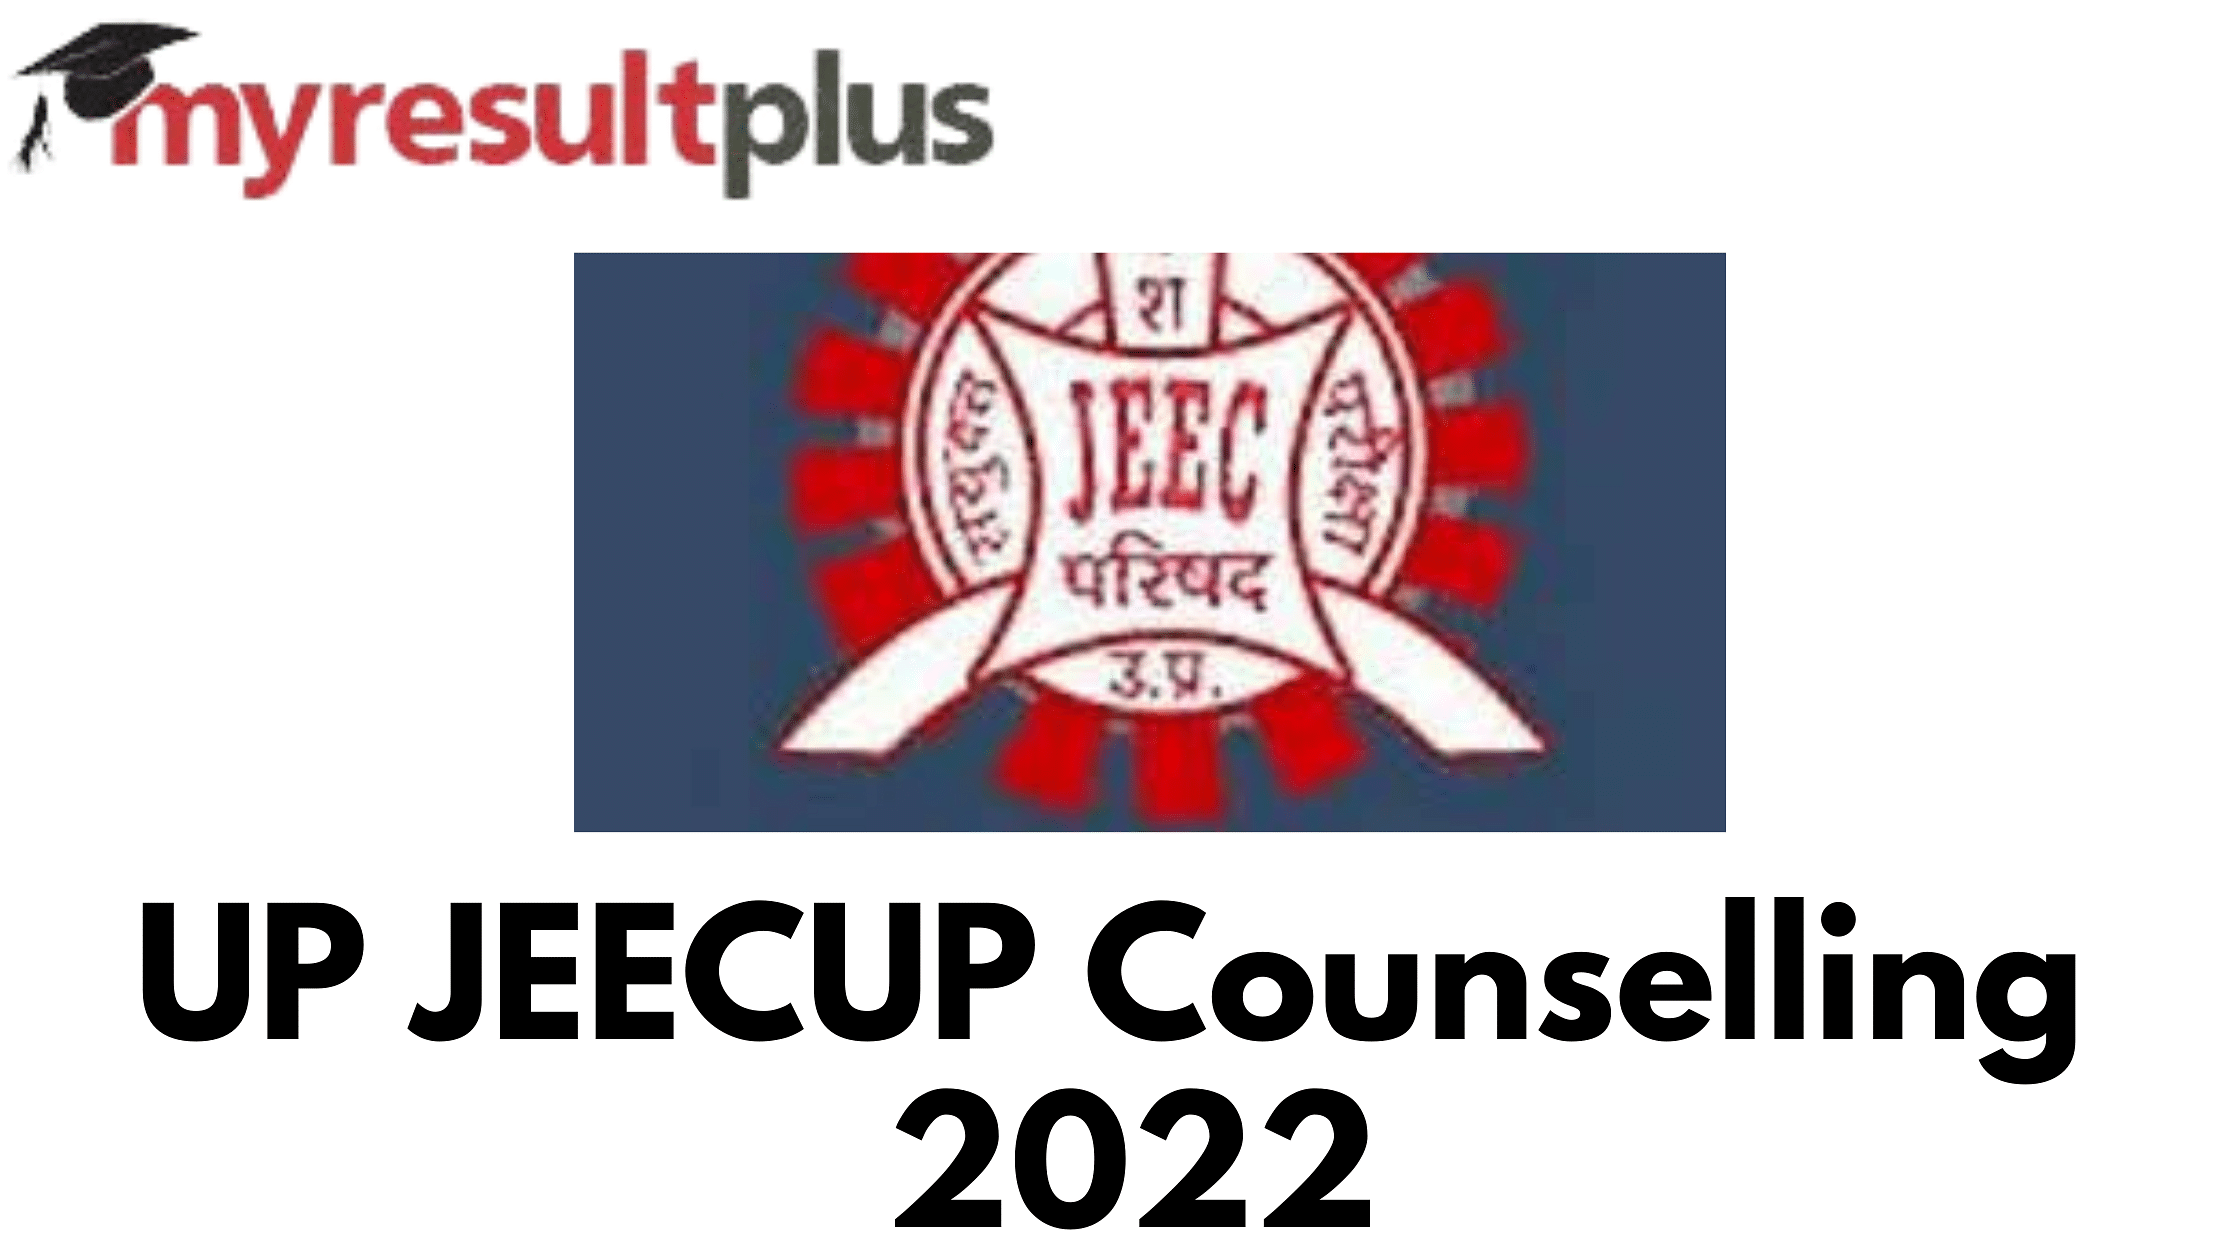 UP JEECUP Counselling 2022 Expected To Commence Soon, Check All Details Here